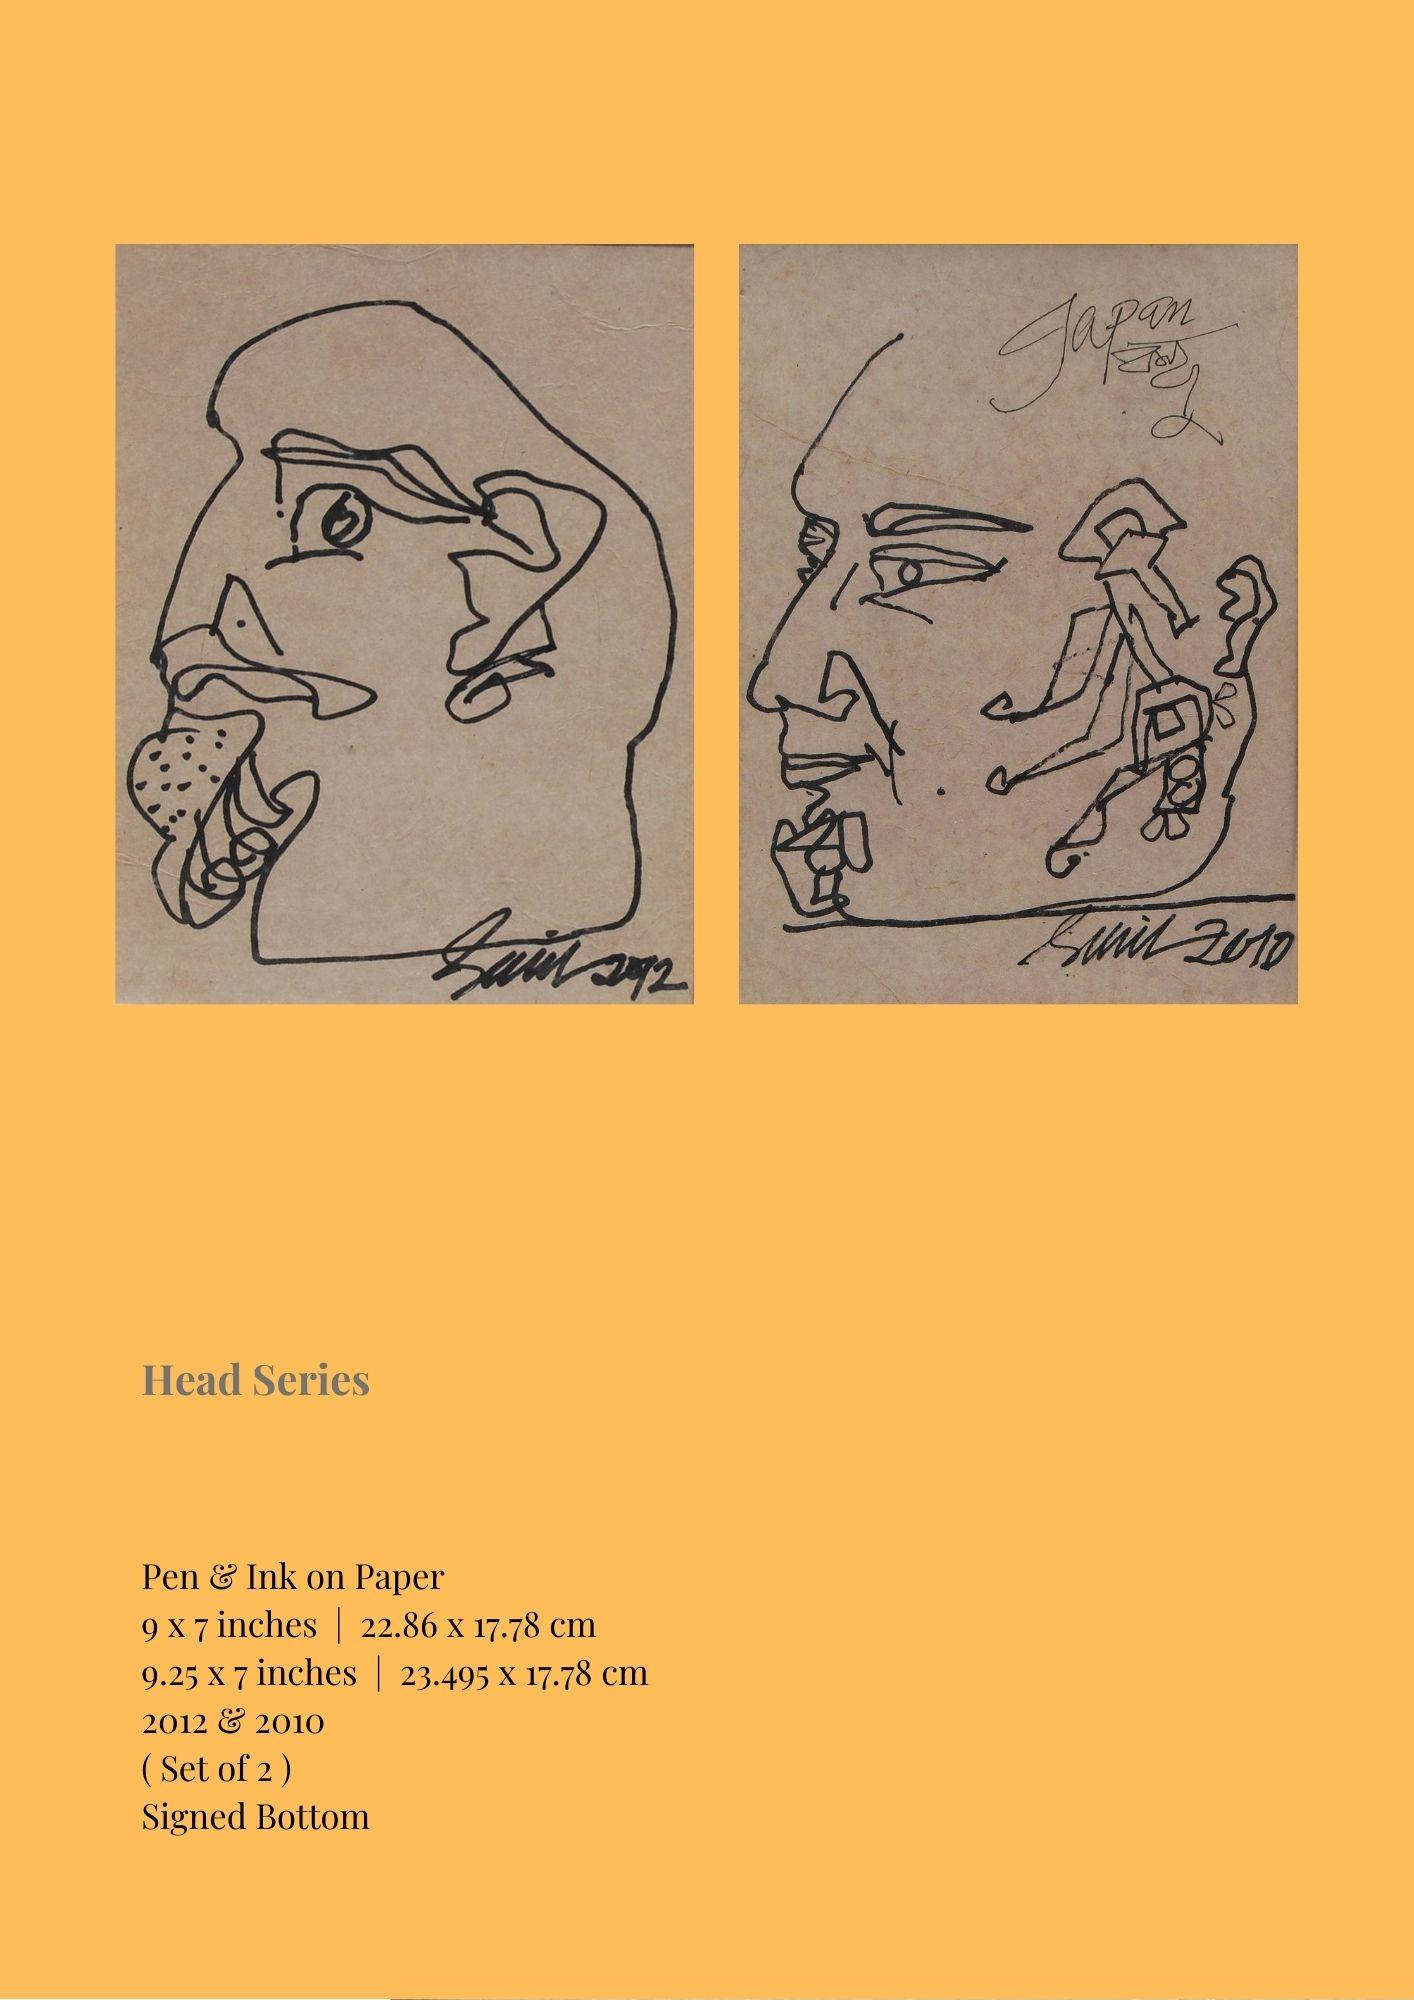 Head Series, Pen & Ink on Paper (Set of 2) by Modern Indian Artist "In Stock"